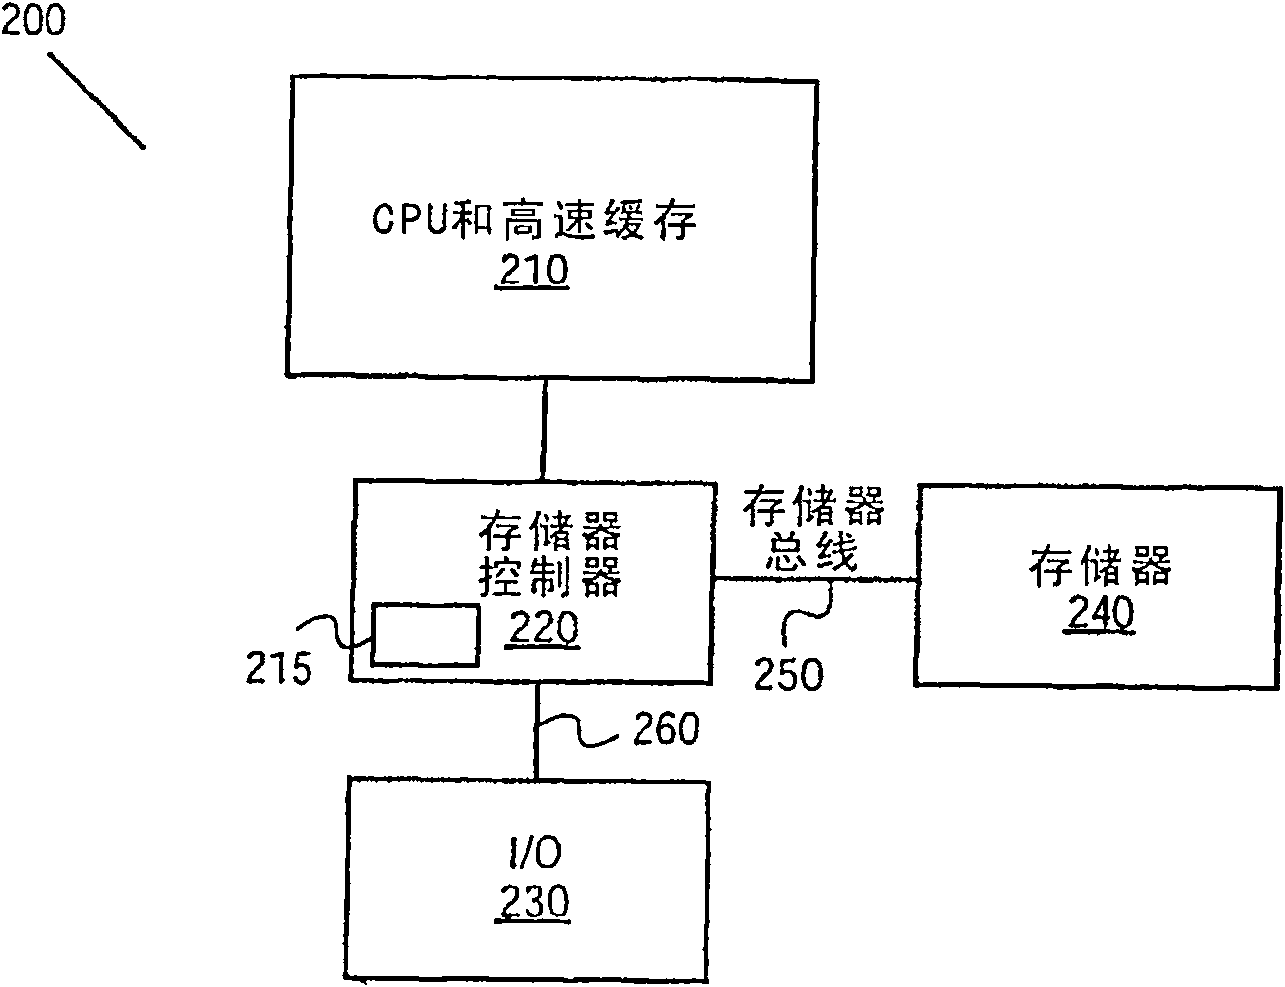 Method and apparatus for memory access scheduling to reduce memory access latency